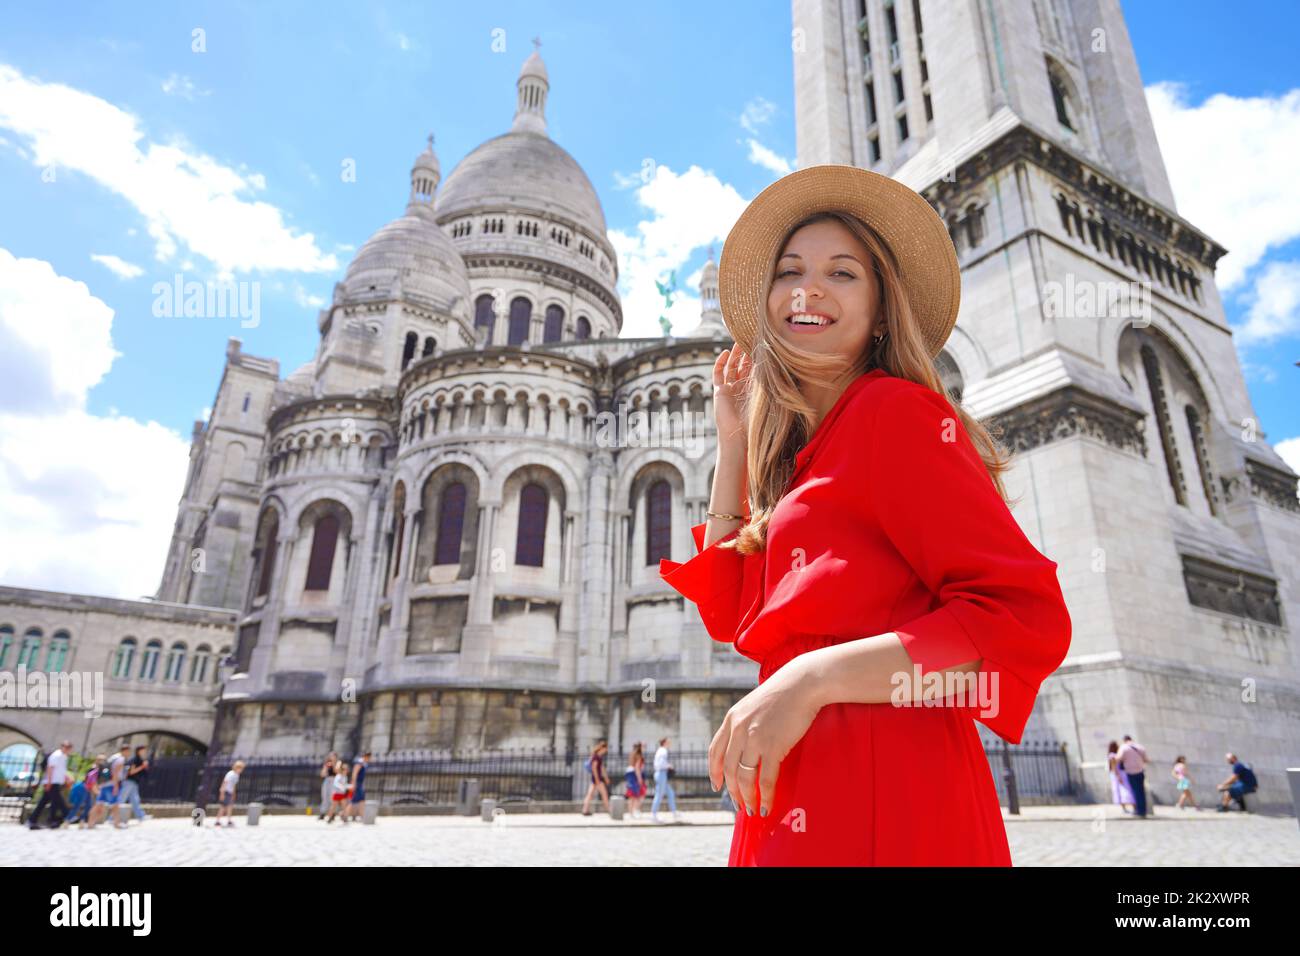 Fashion model walking in Paris with the Basilica of the Sacred Heart of Paris on the background. Smiling at camera. Low angle. Stock Photo